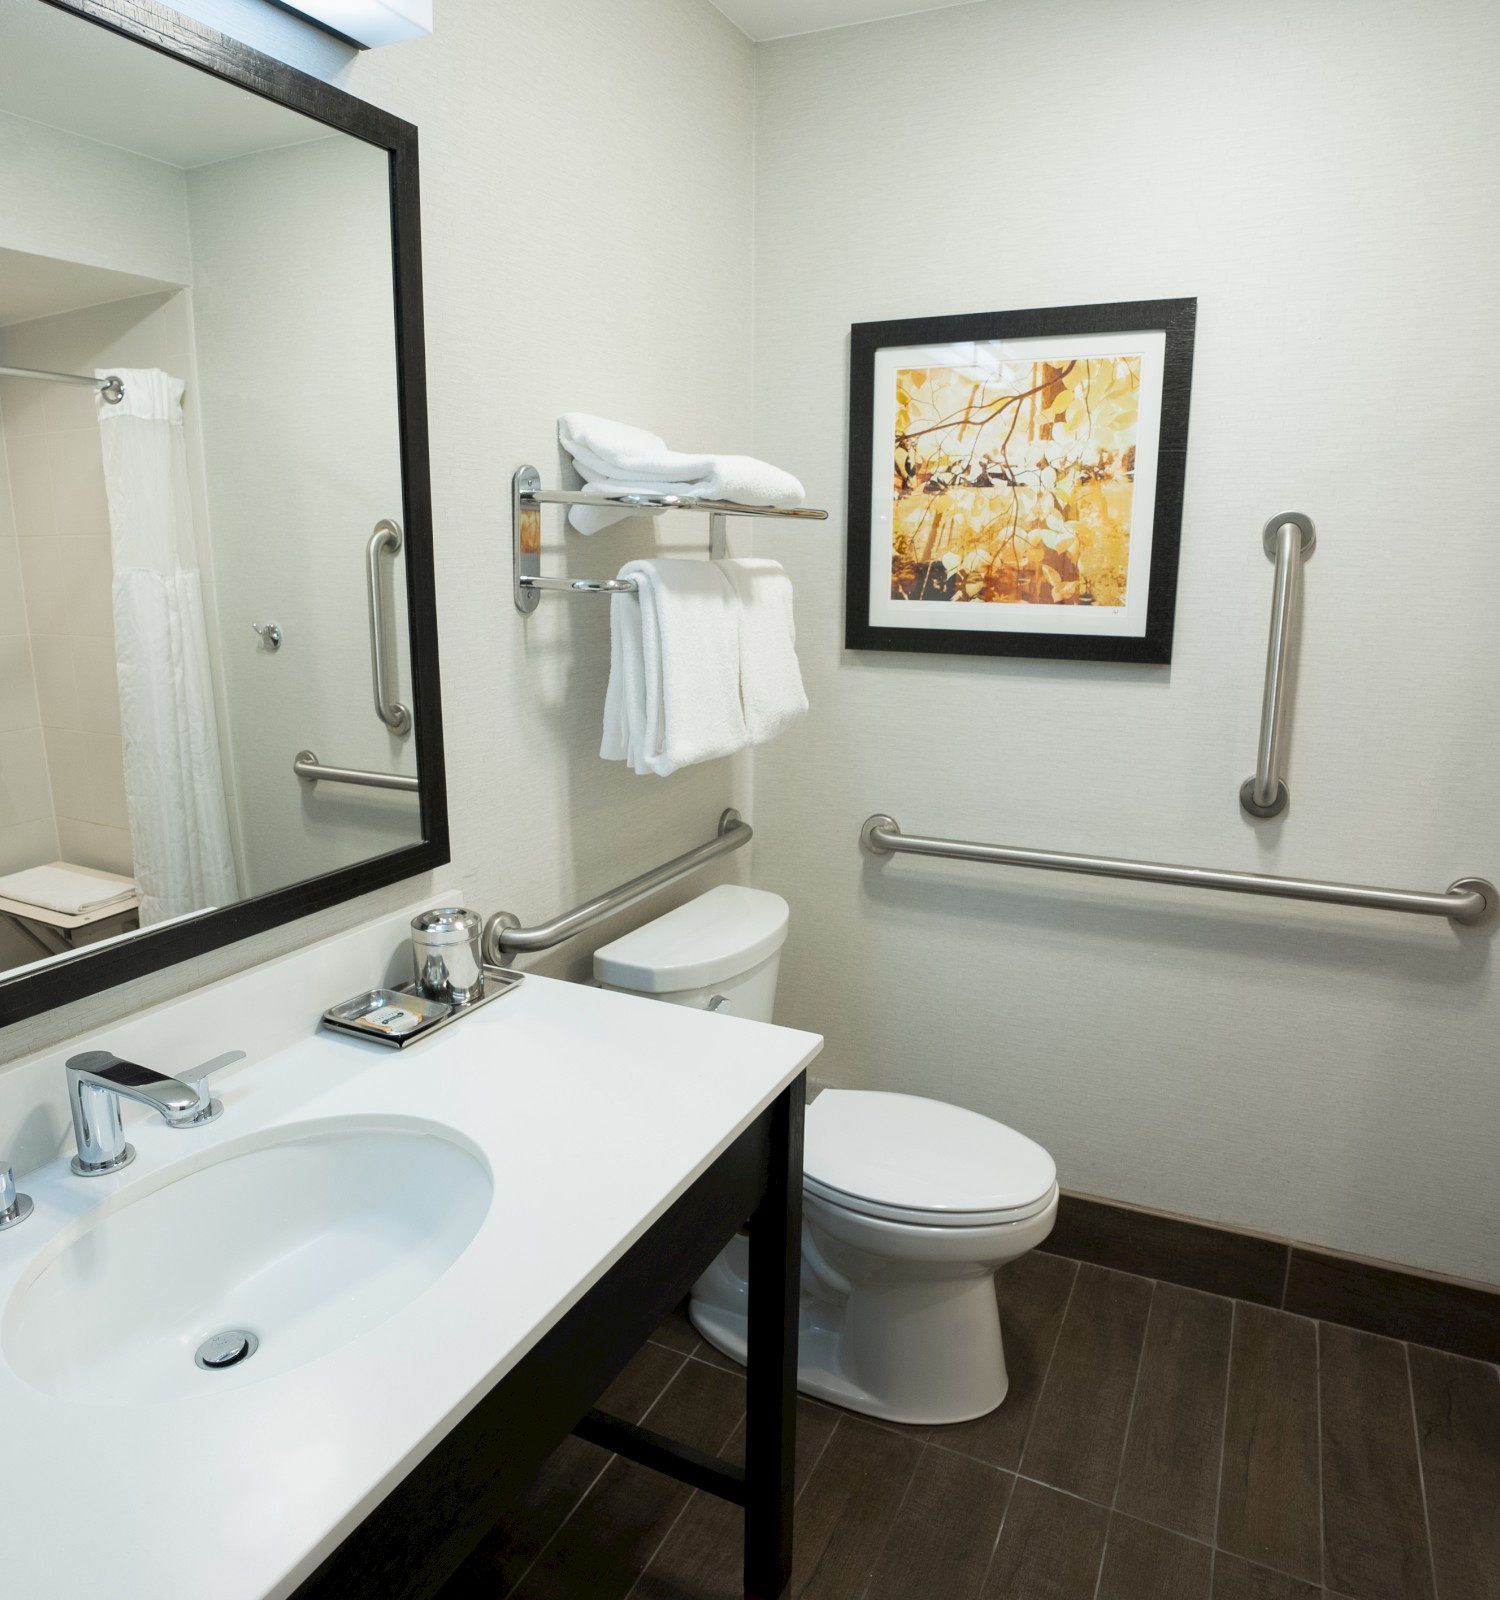 The image shows a modern bathroom with a sink, a large mirror, a toilet, a shower with a curtain, towel racks, and a framed picture on the wall.